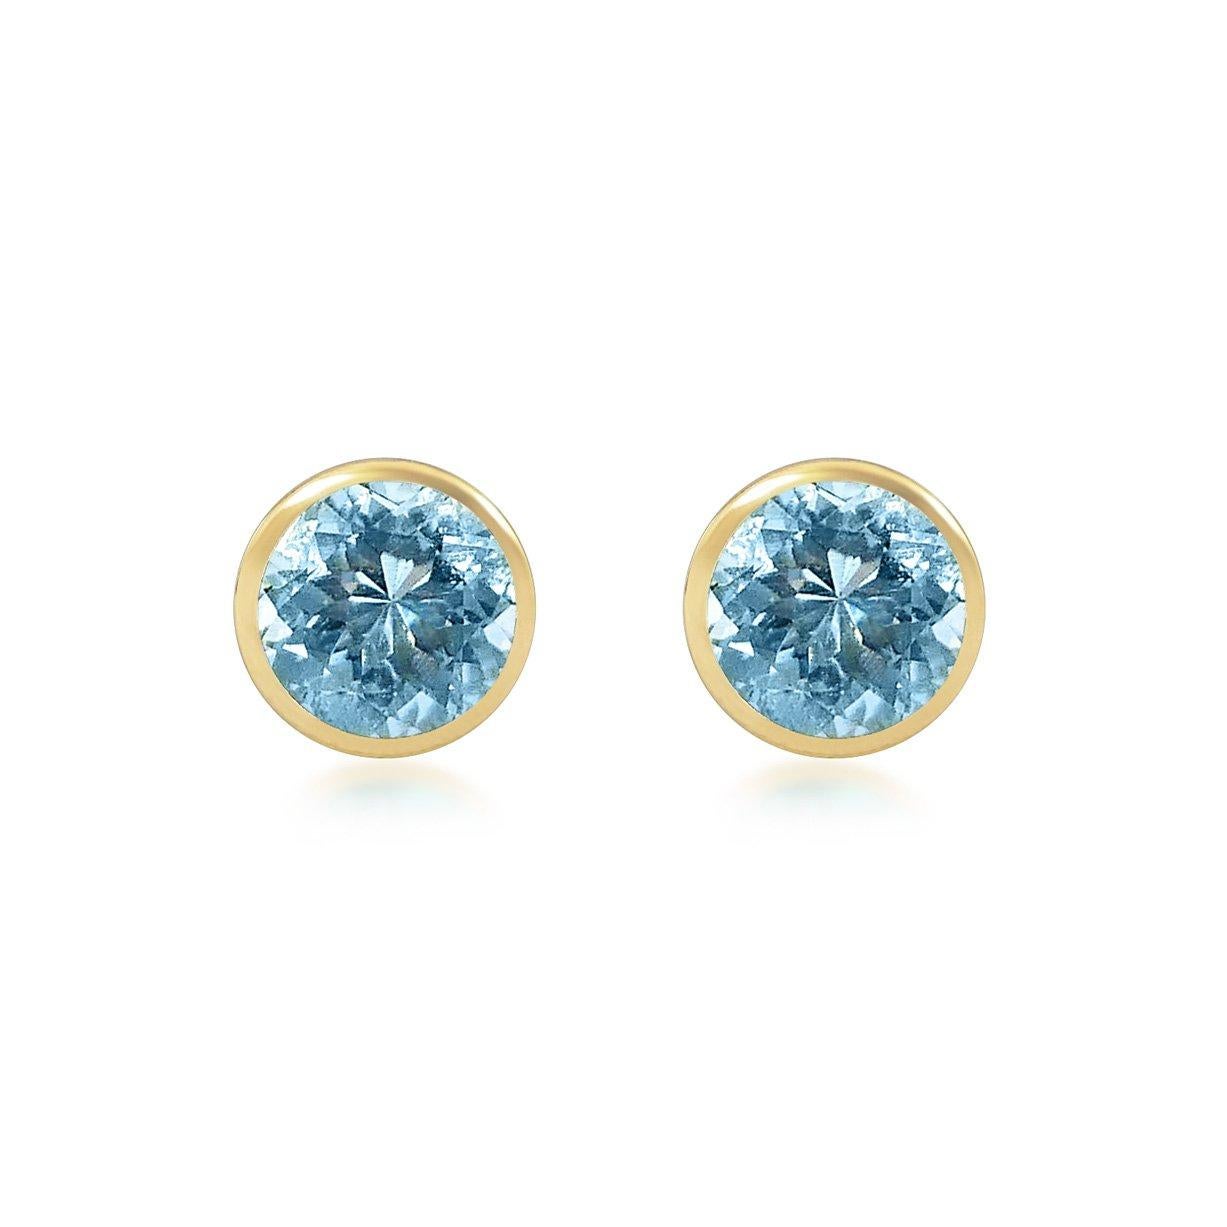 Contemporary Handcrafted 2.70 Carats Aquamarine 18 Karat Yellow Gold Stud Earrings For Sale